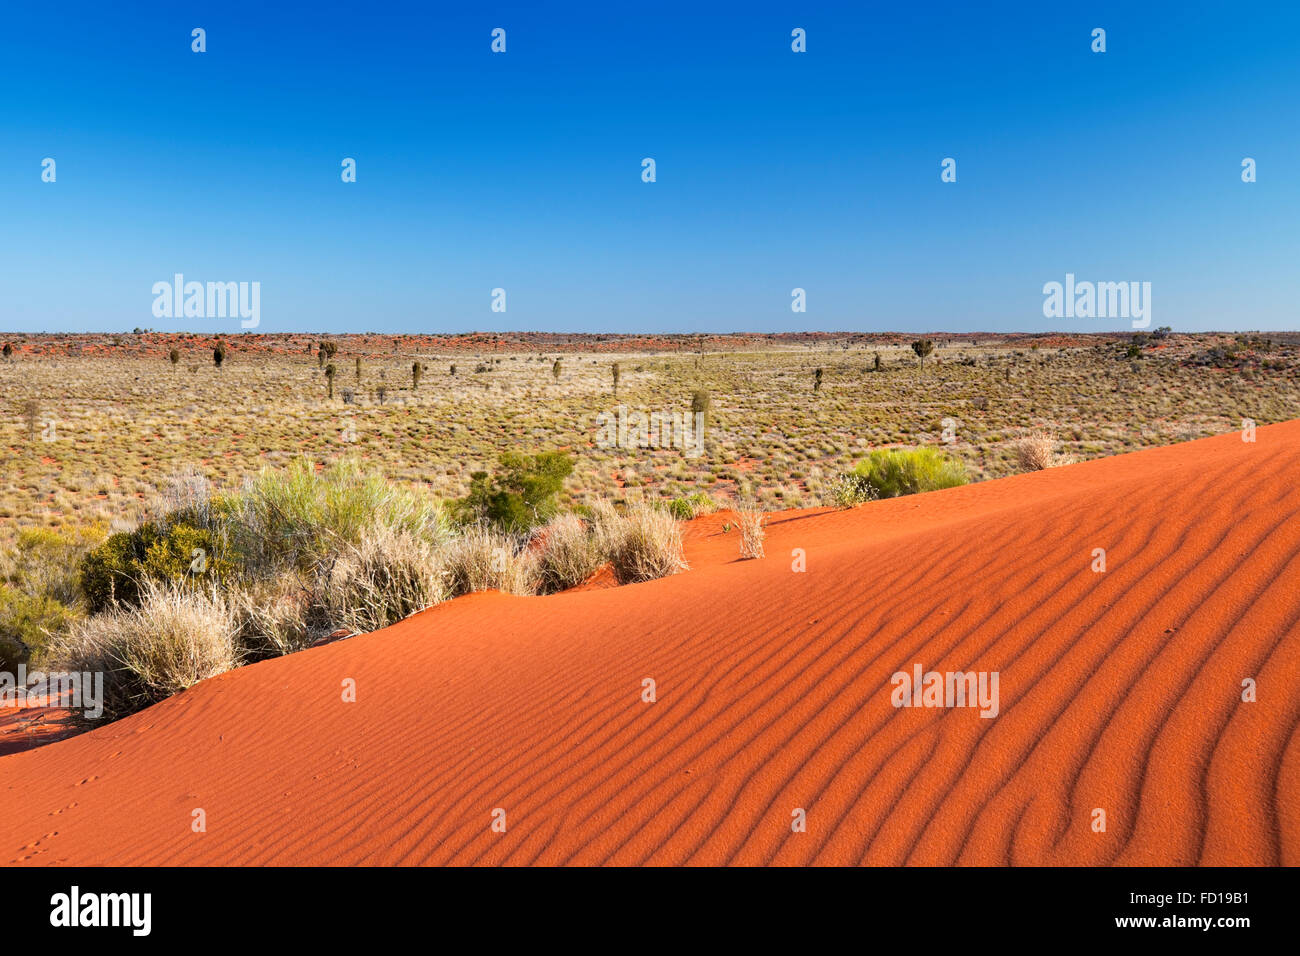 Ripples in a red sand dune on a clear day. Photographed in the Northern Territory in Australia. Stock Photo